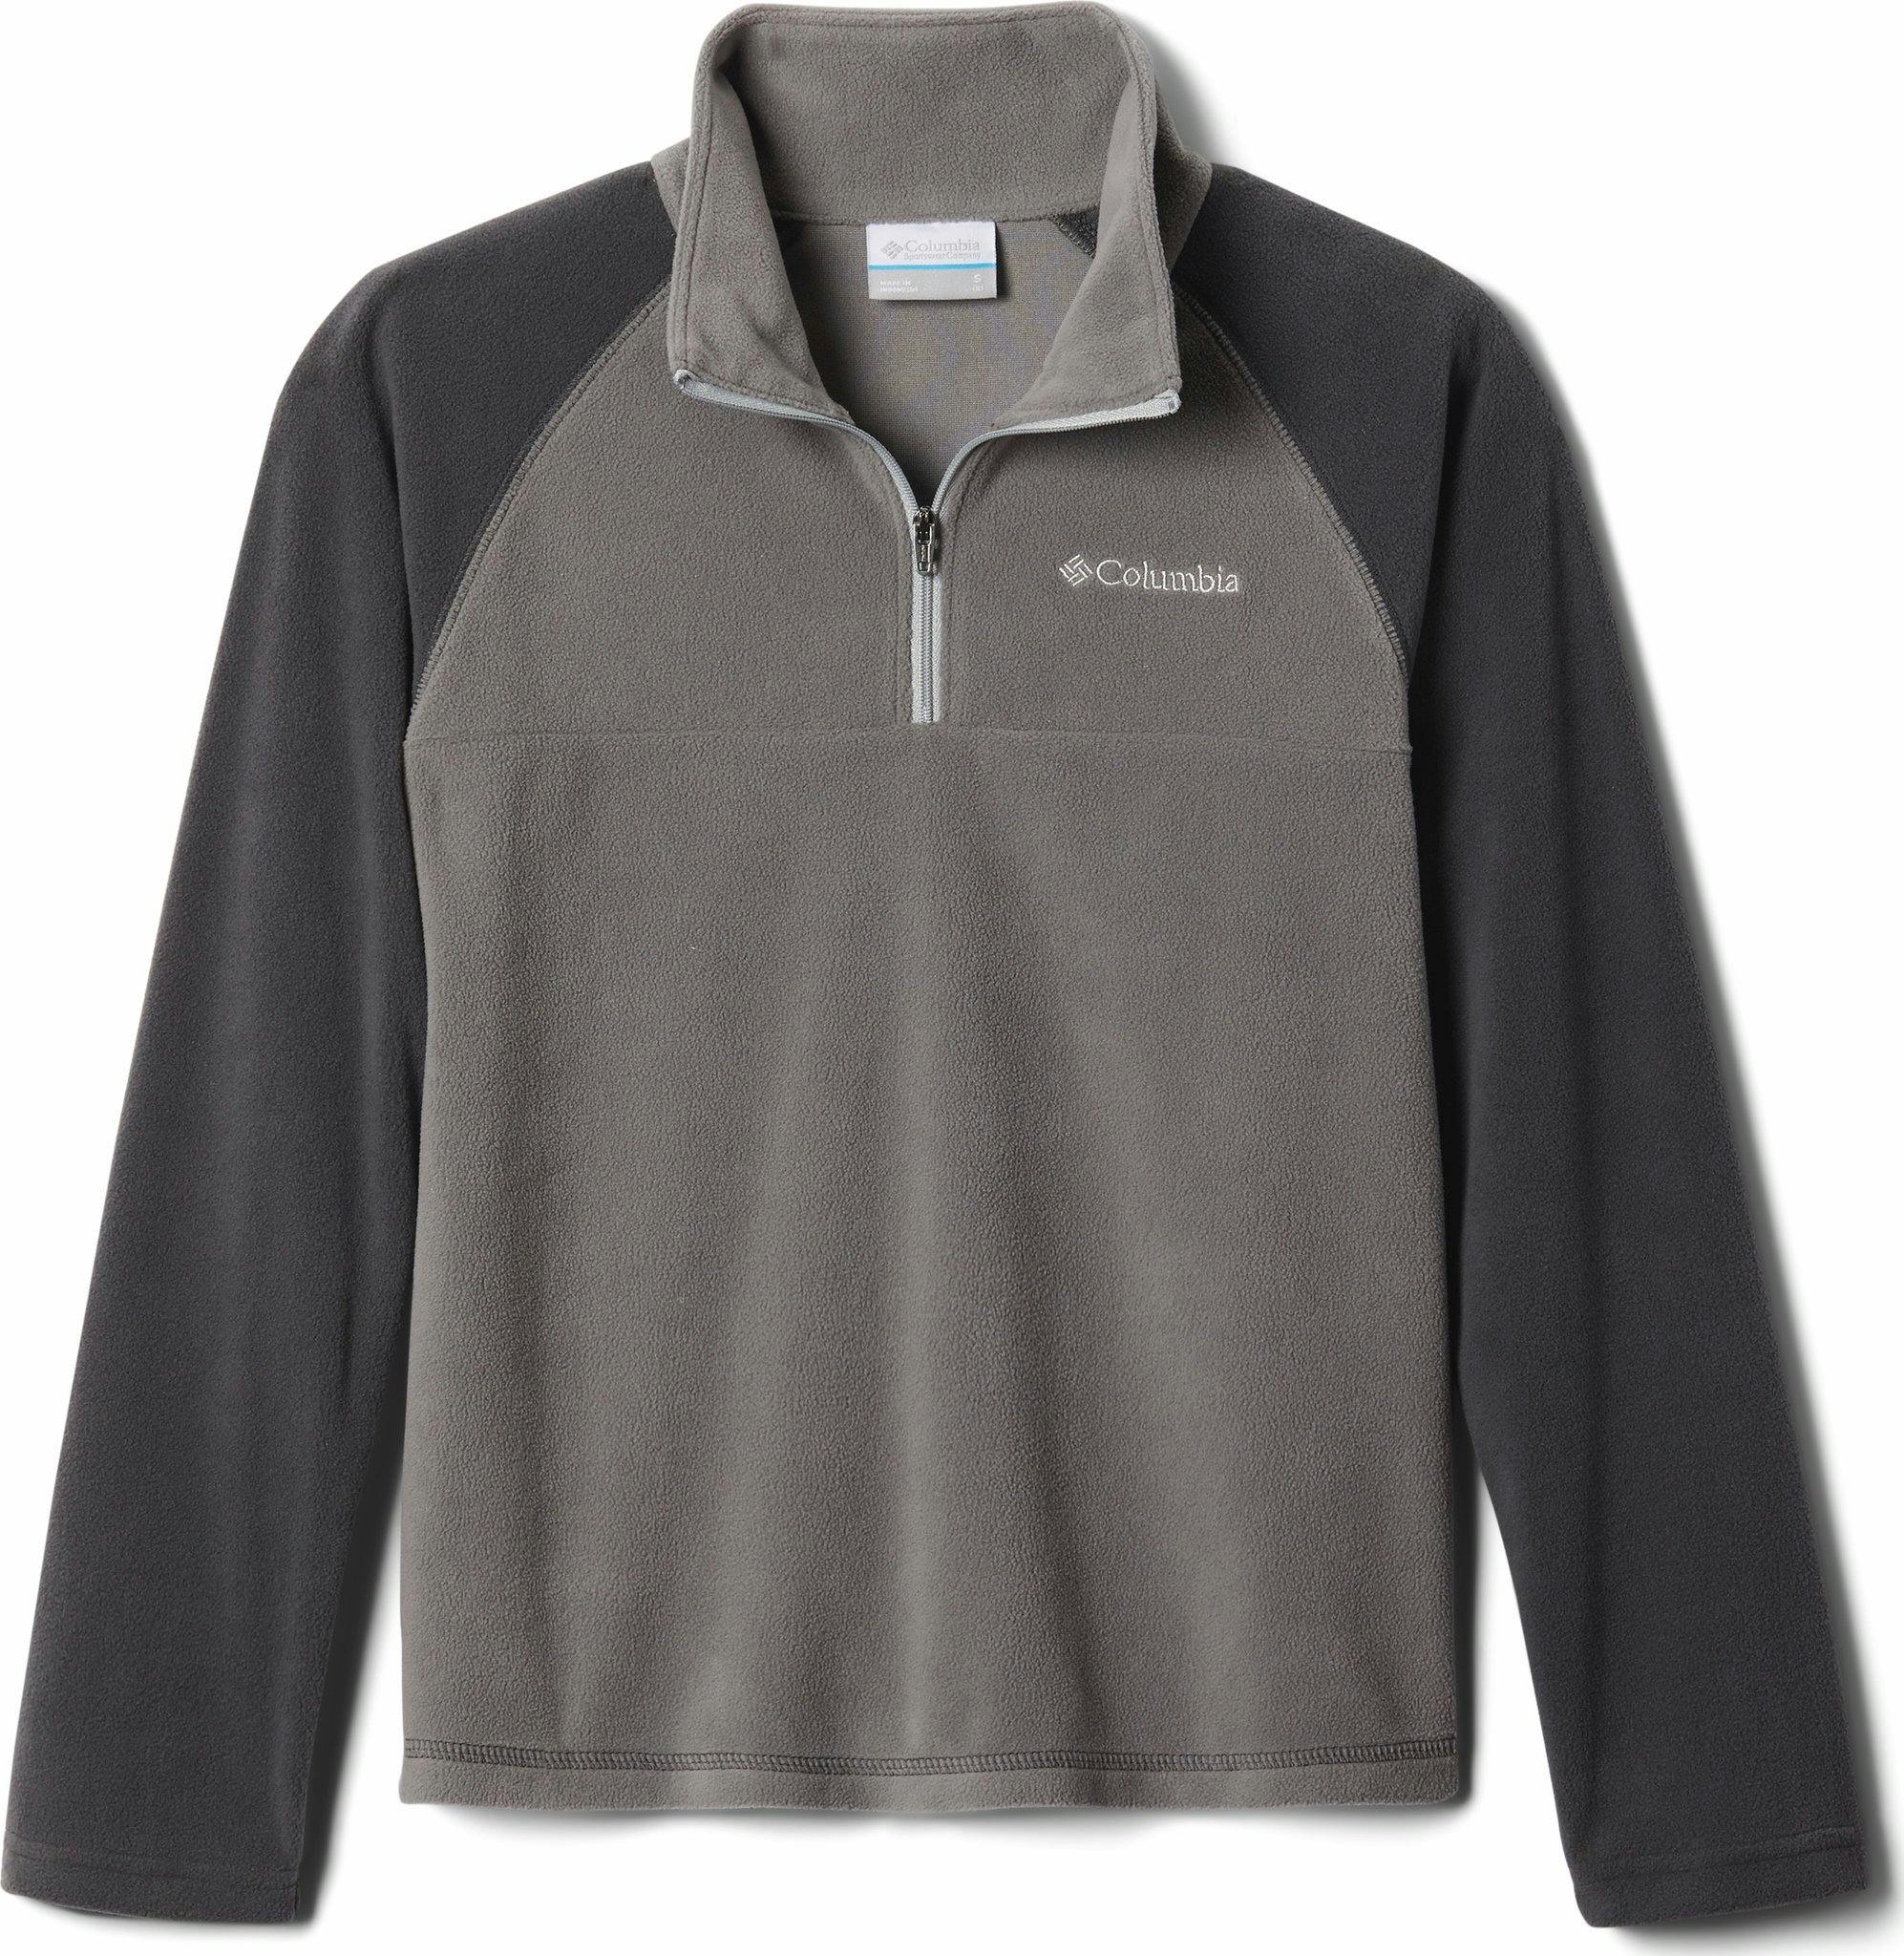 Product image for Glacial Half Zip - Boys